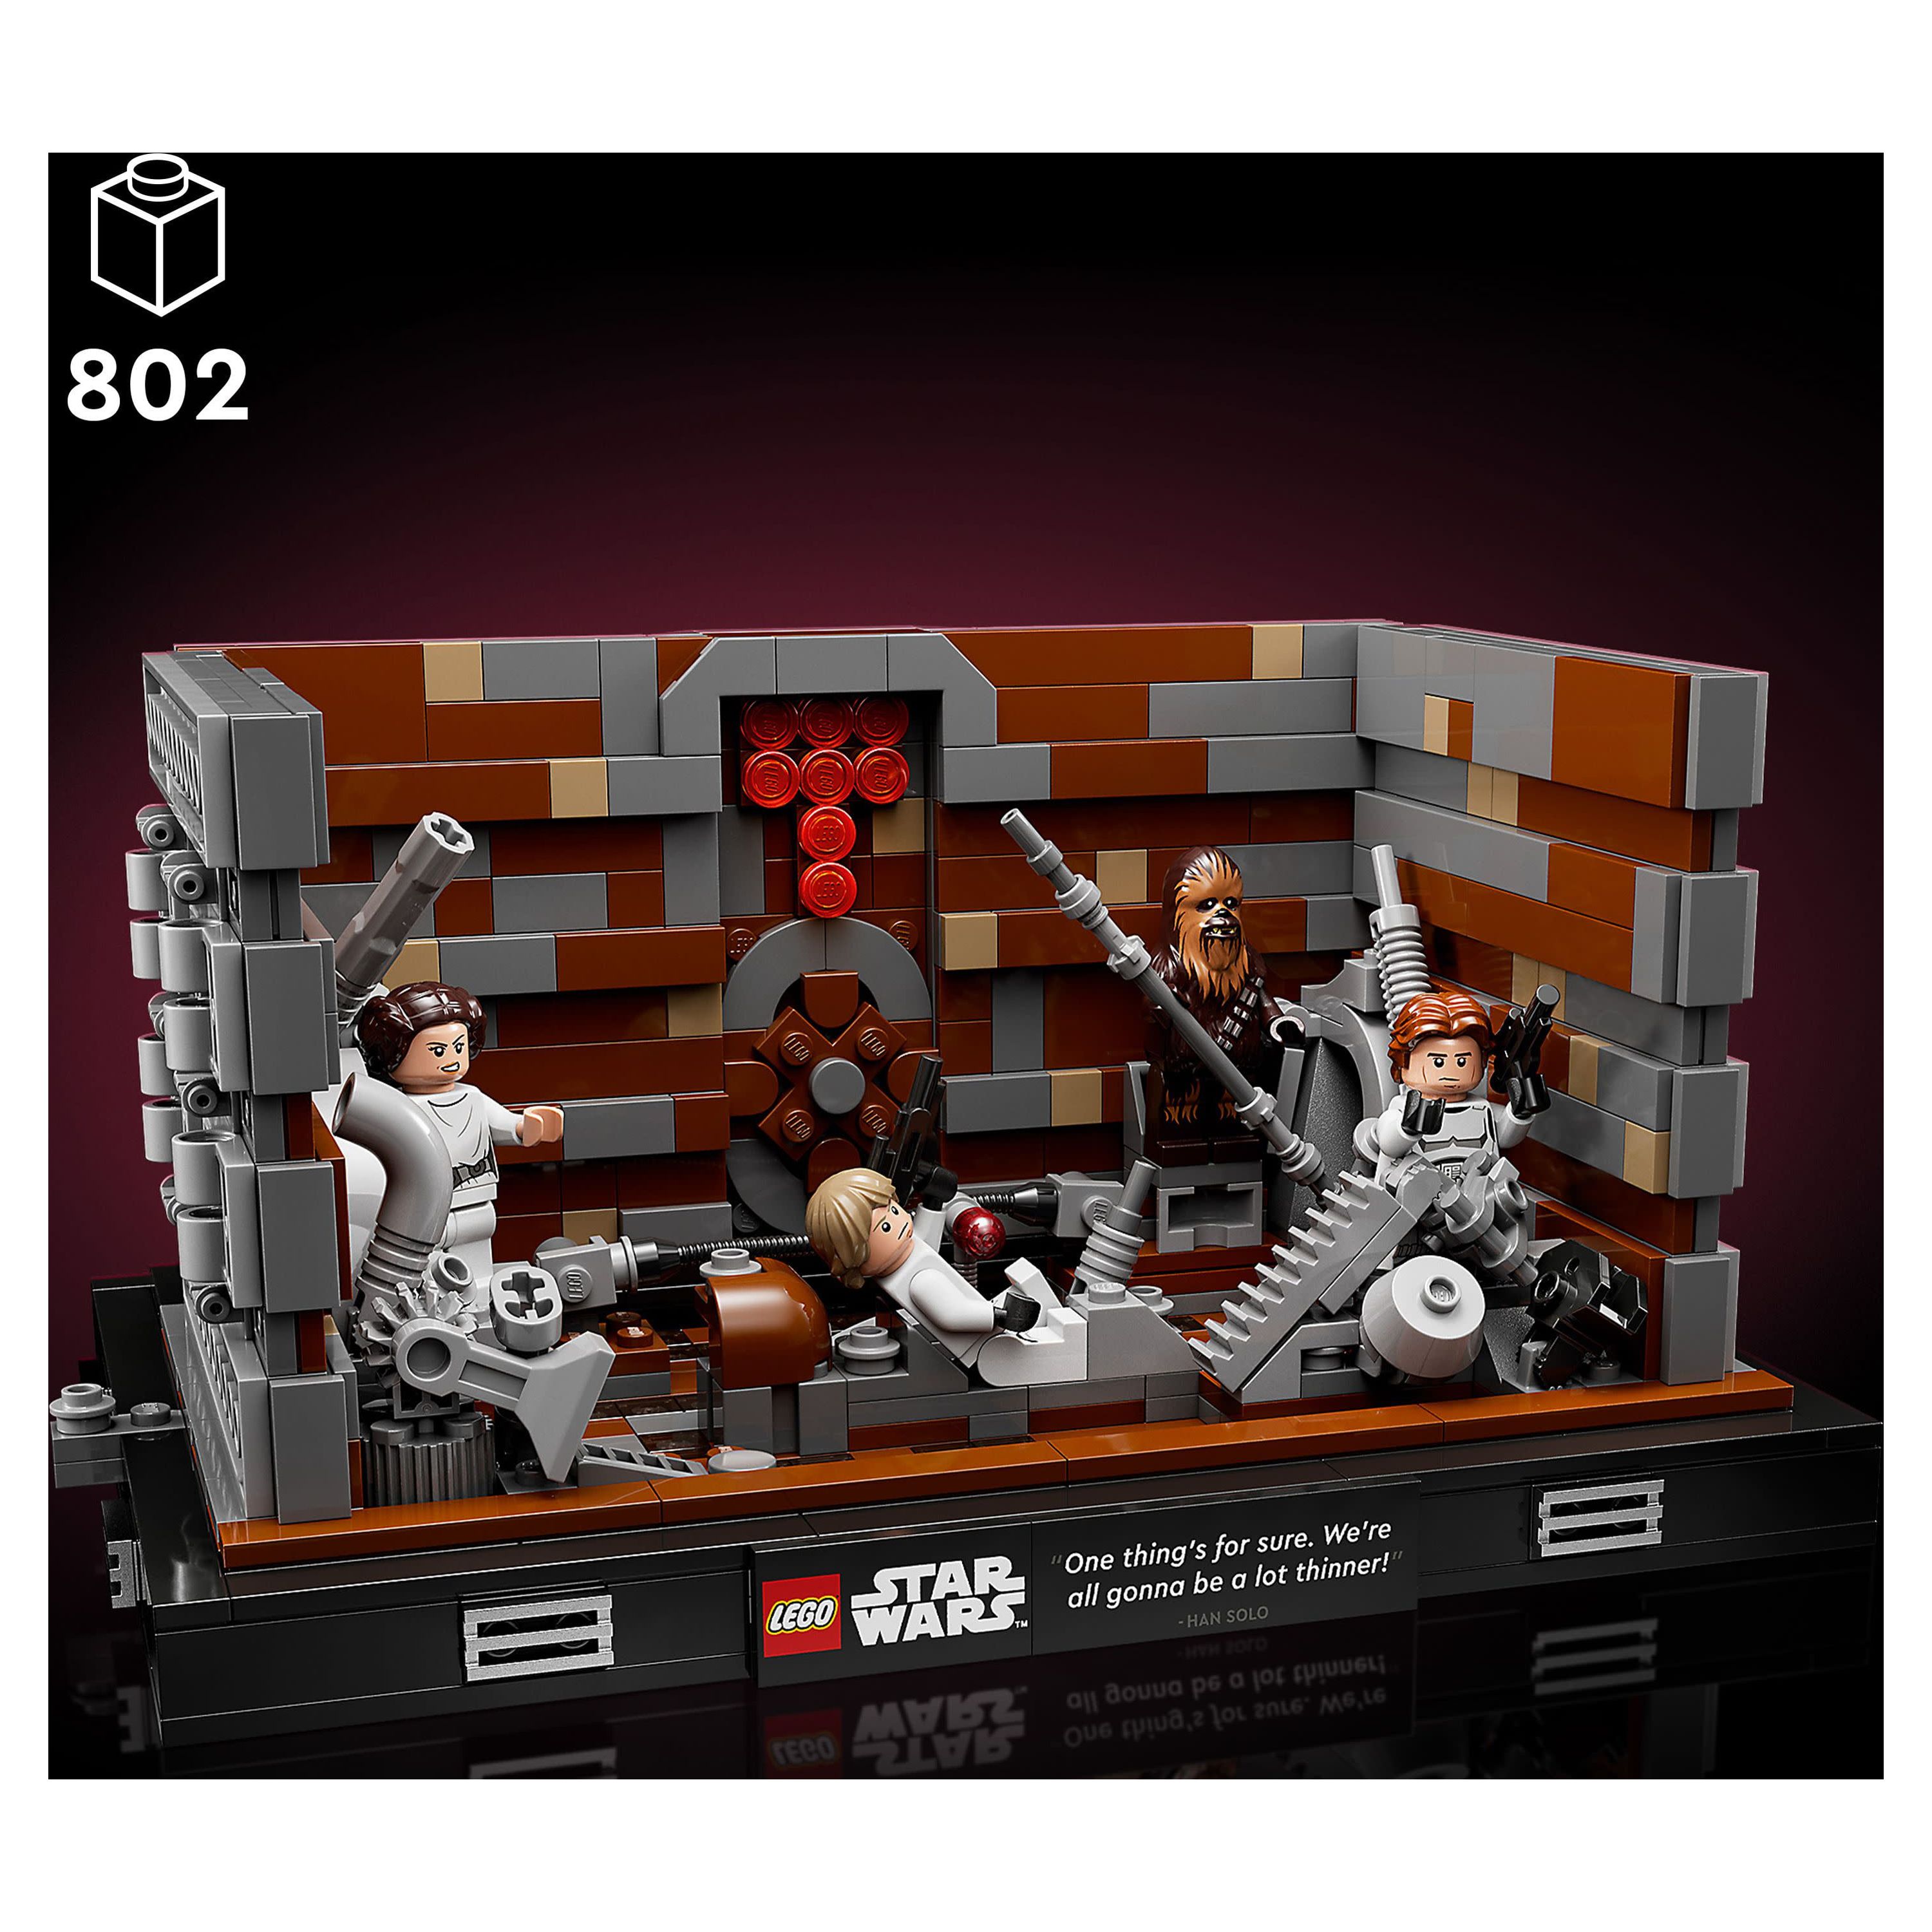 LEGO Star Wars Death Star Trash Compactor Diorama Series 75339 Adult Building Set with 6 Star Wars Figures including Princess Leia, Chewbacca & R2-D2, Gift for Star Wars Fans - image 4 of 8